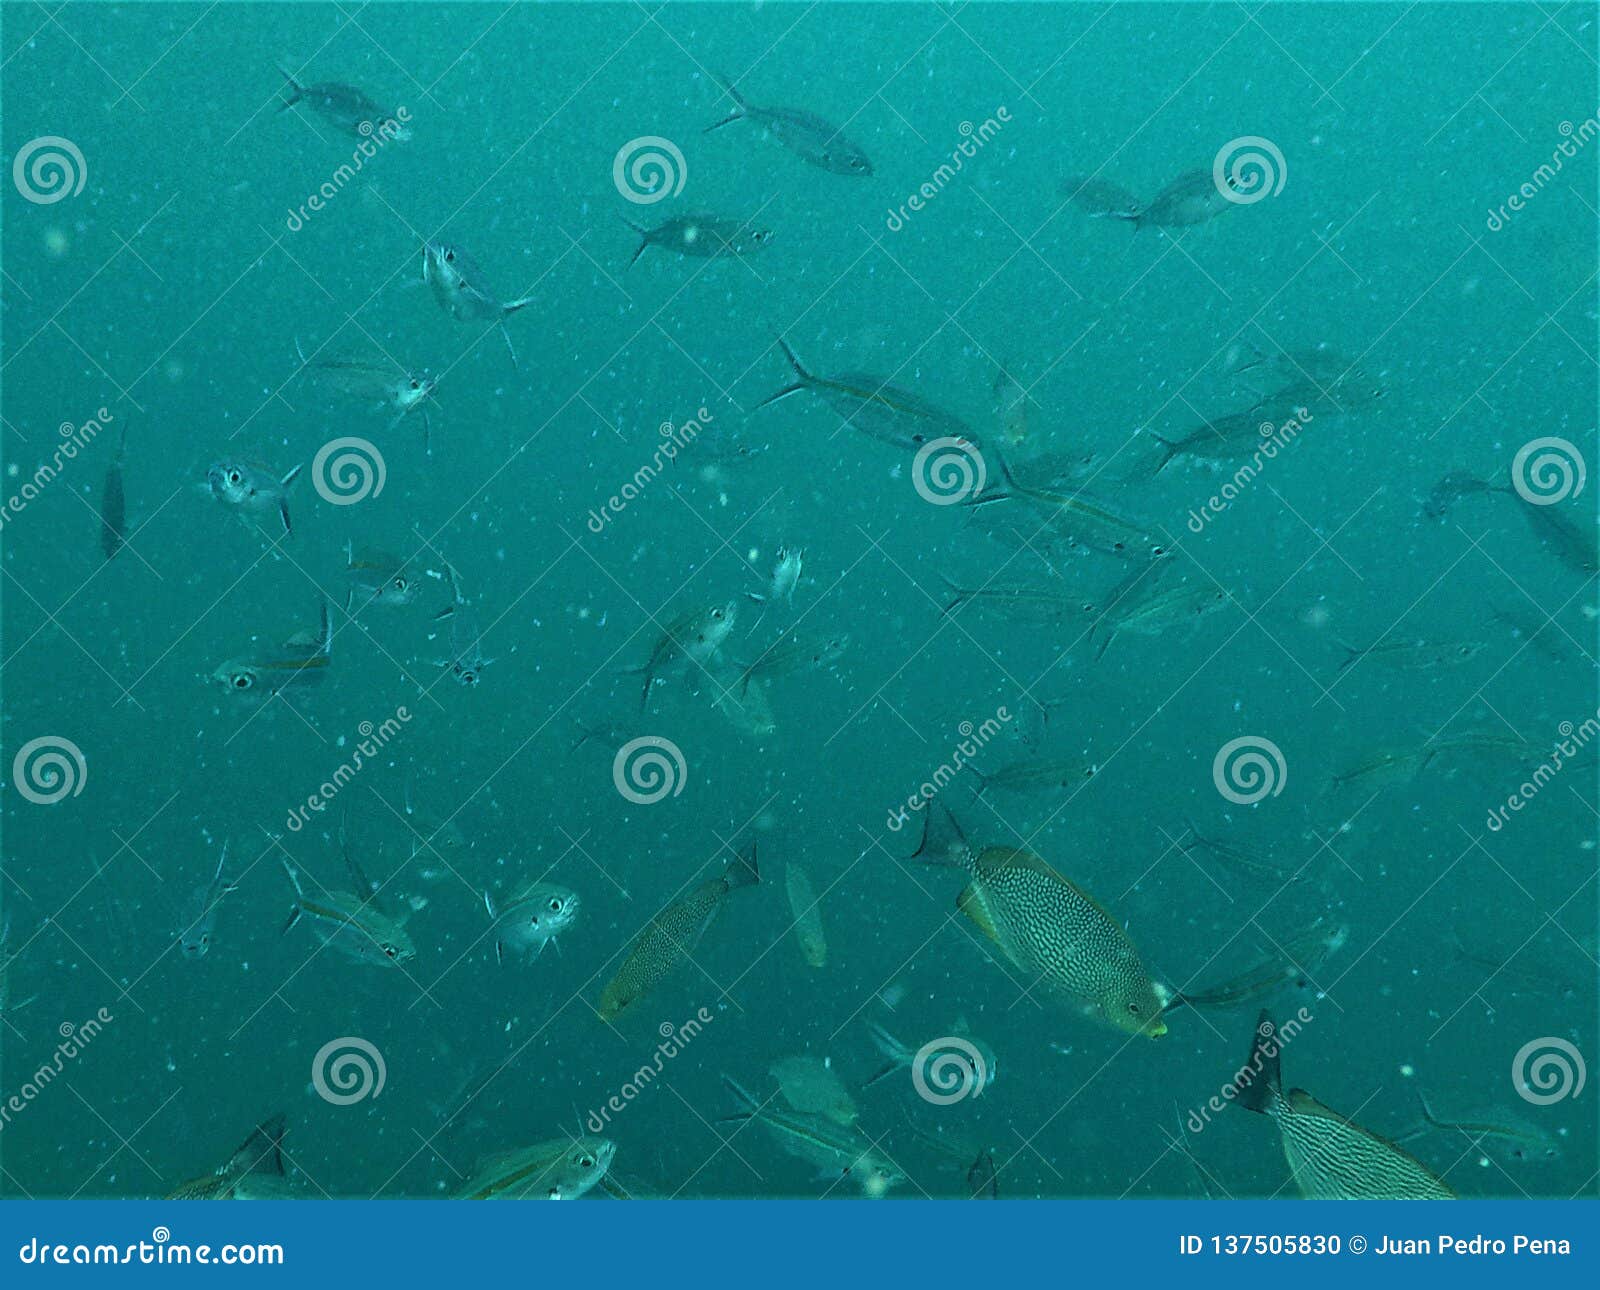 blue background of fishes on the background of the sea.